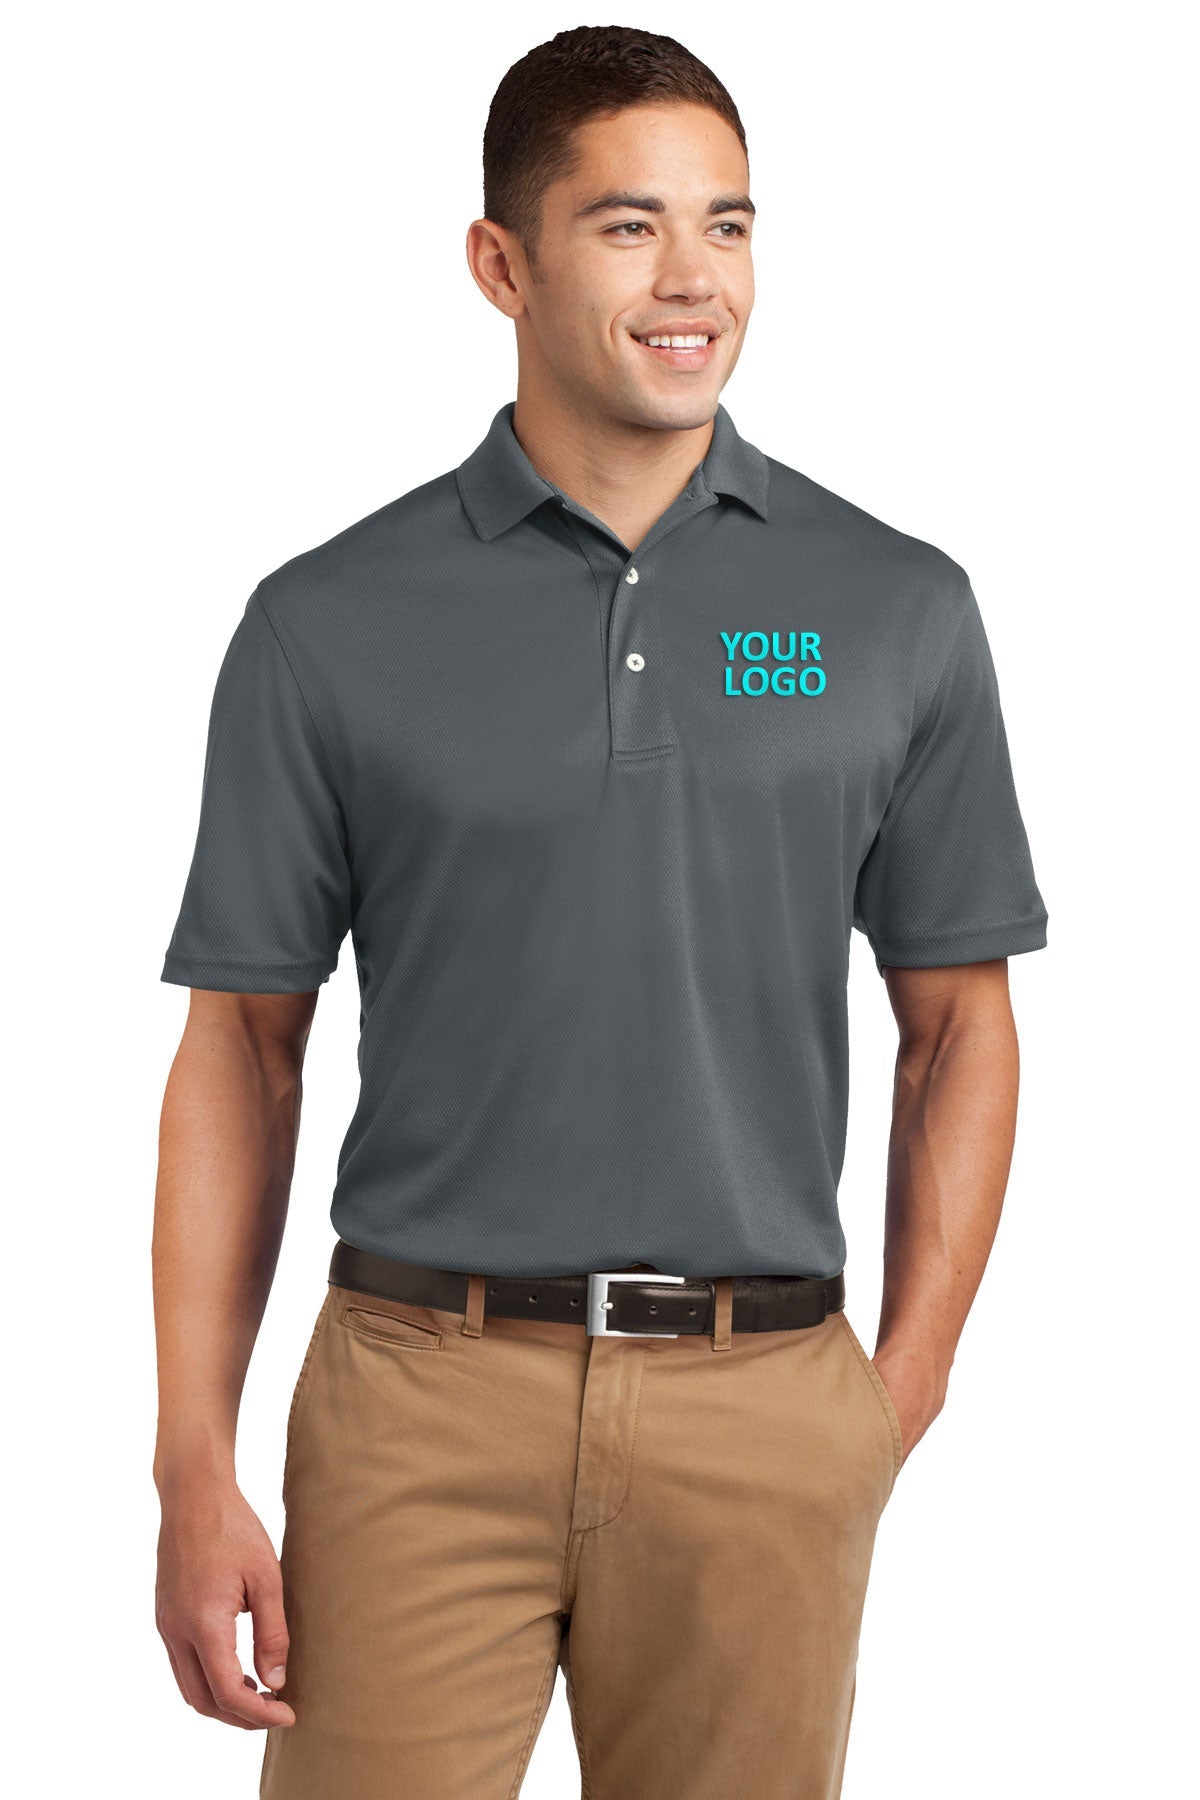 Sport-Tek Steel TK469 business polo shirts embroidered